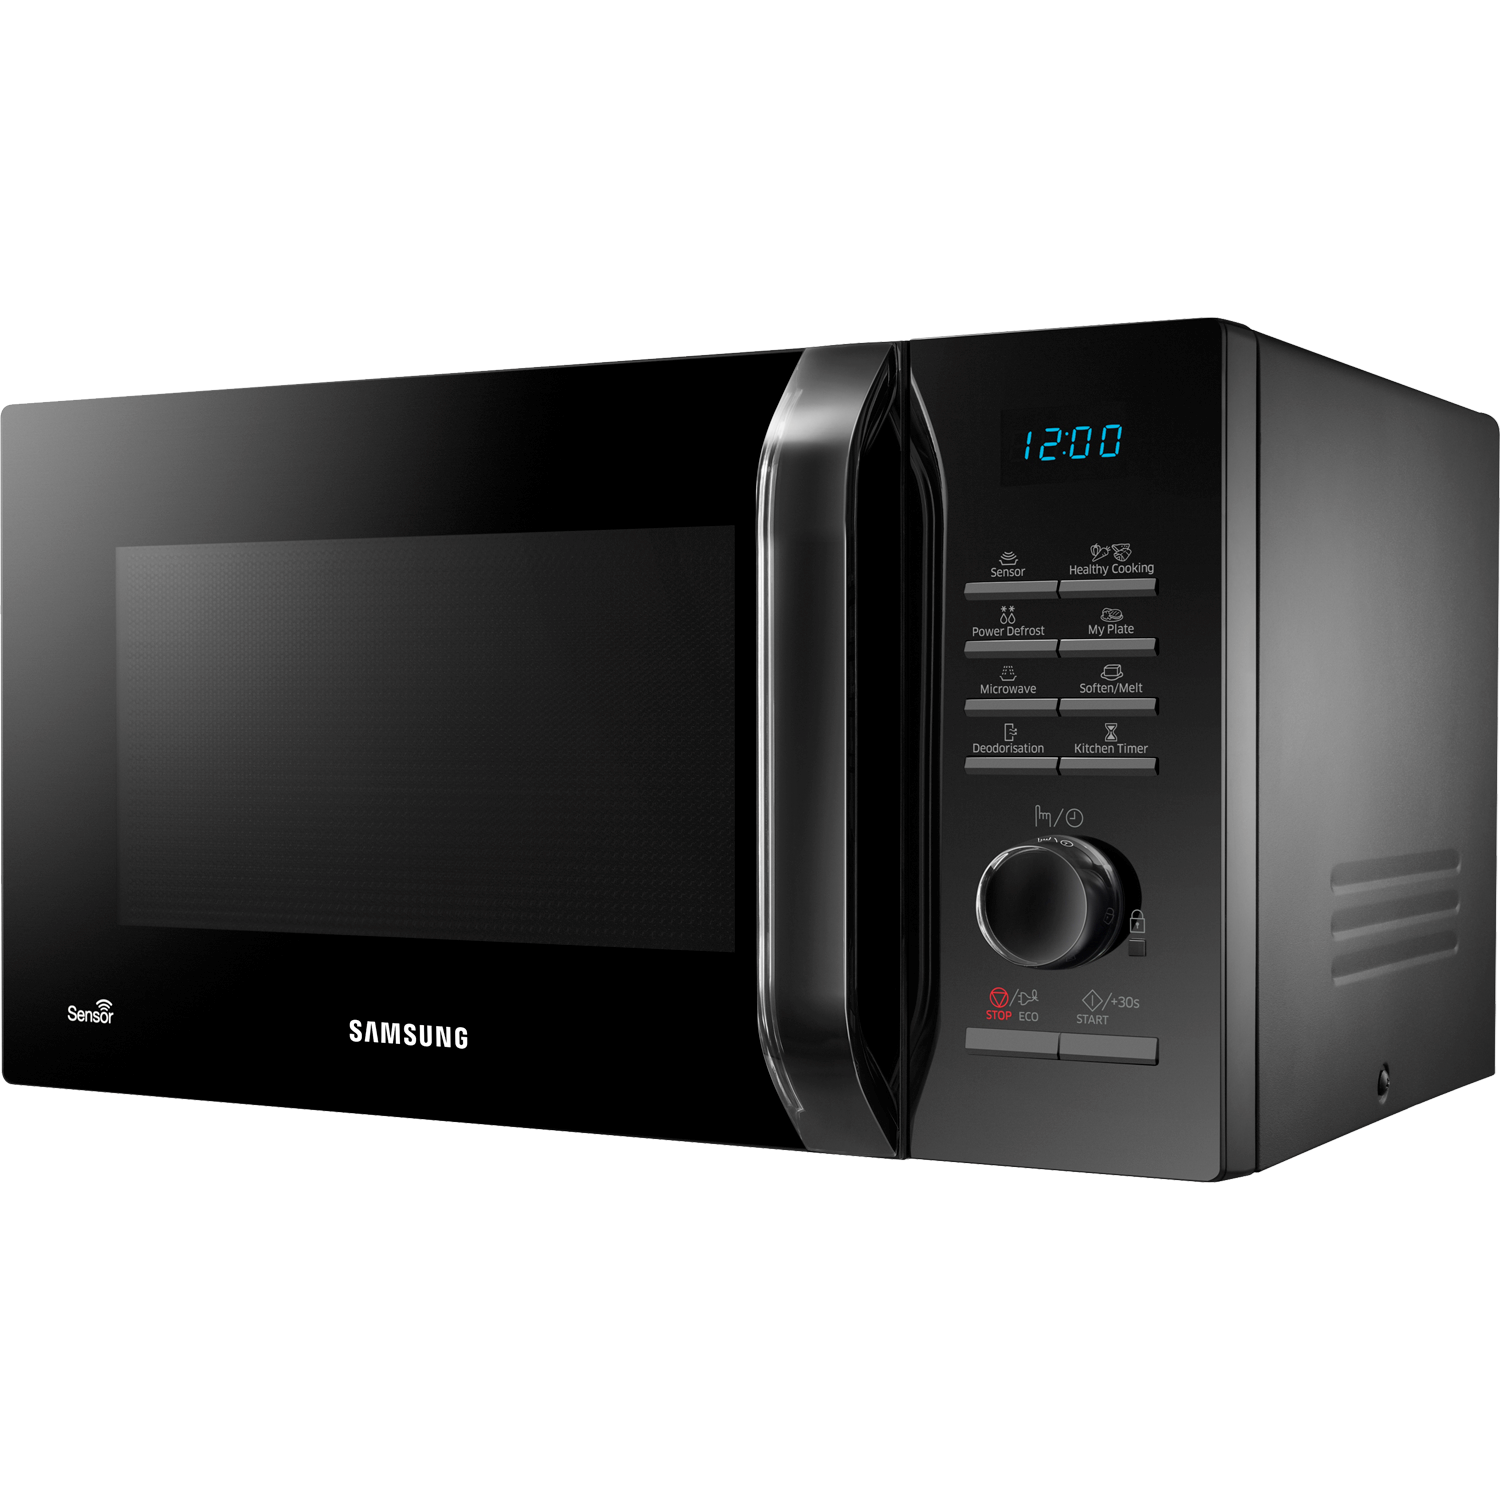 Microwave Oven PNG Image